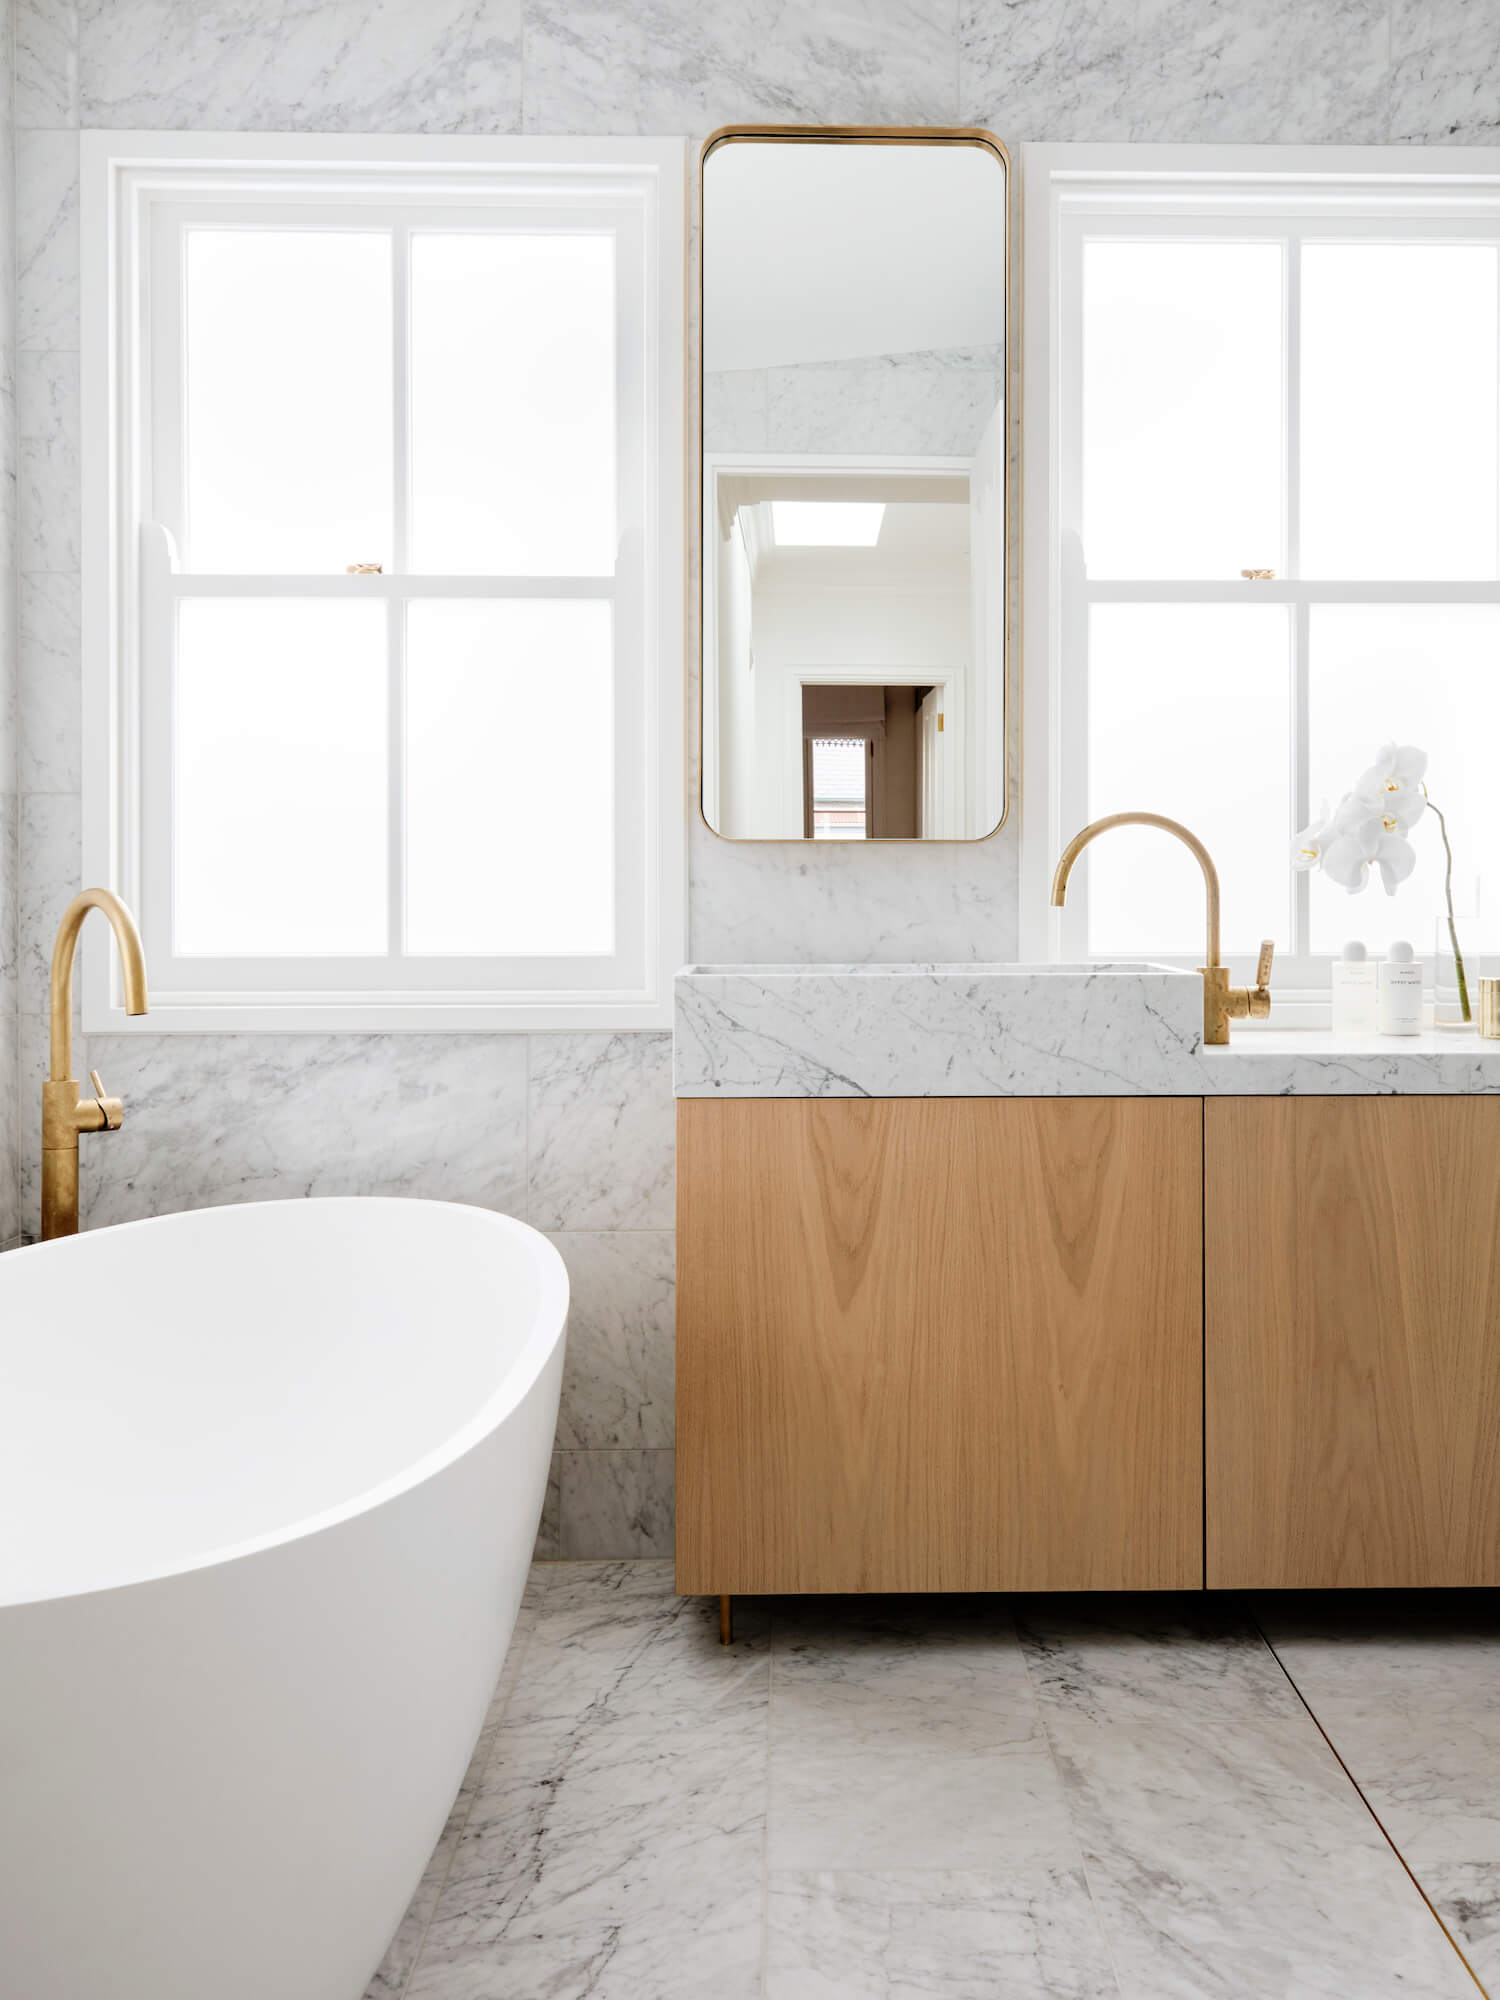 marble bathroom with brass detail and oak vanity | house tour on coco kelley